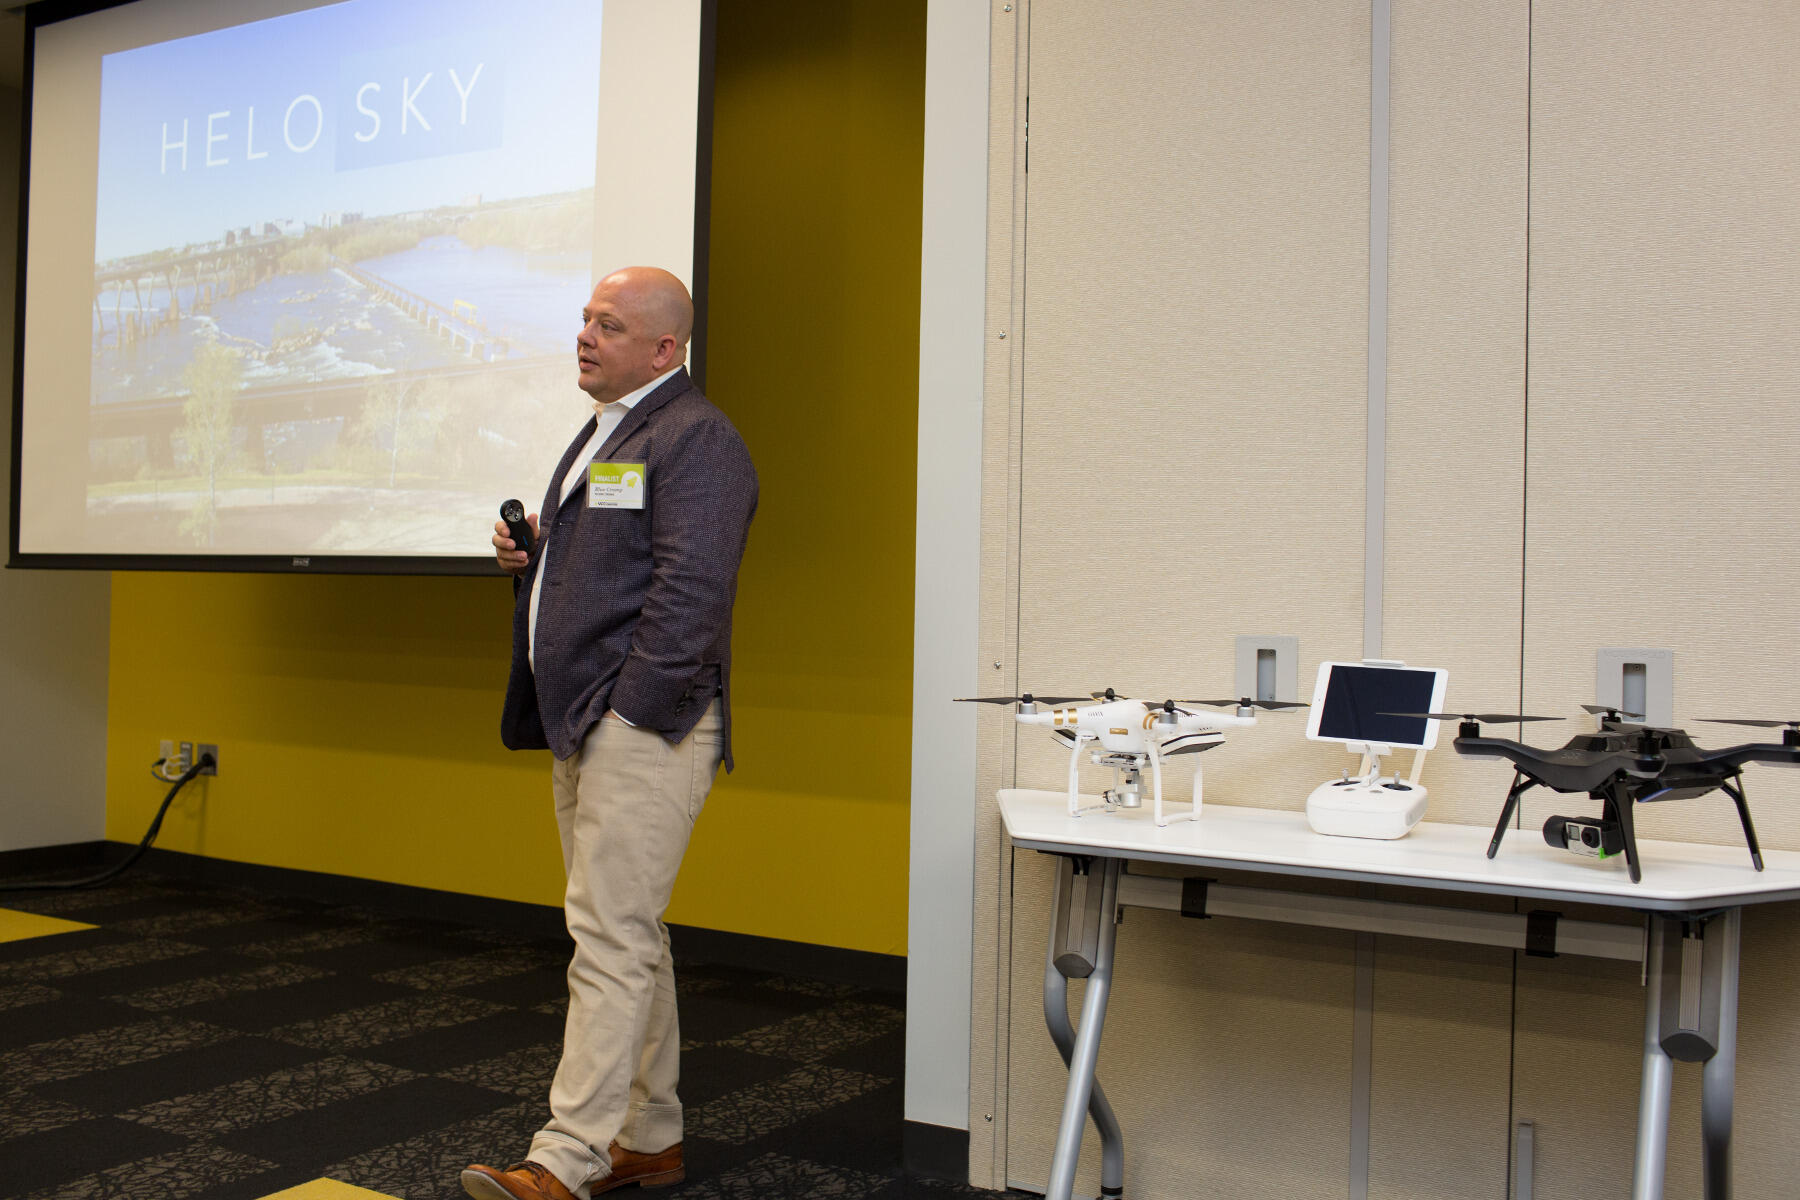 G. Blue Crump, a first-year graduate student in product innovation at the da Vinci Center, was part of the winning team in the graduate school division. Crump co-founded HeloSky, which created a new communication system for drones.